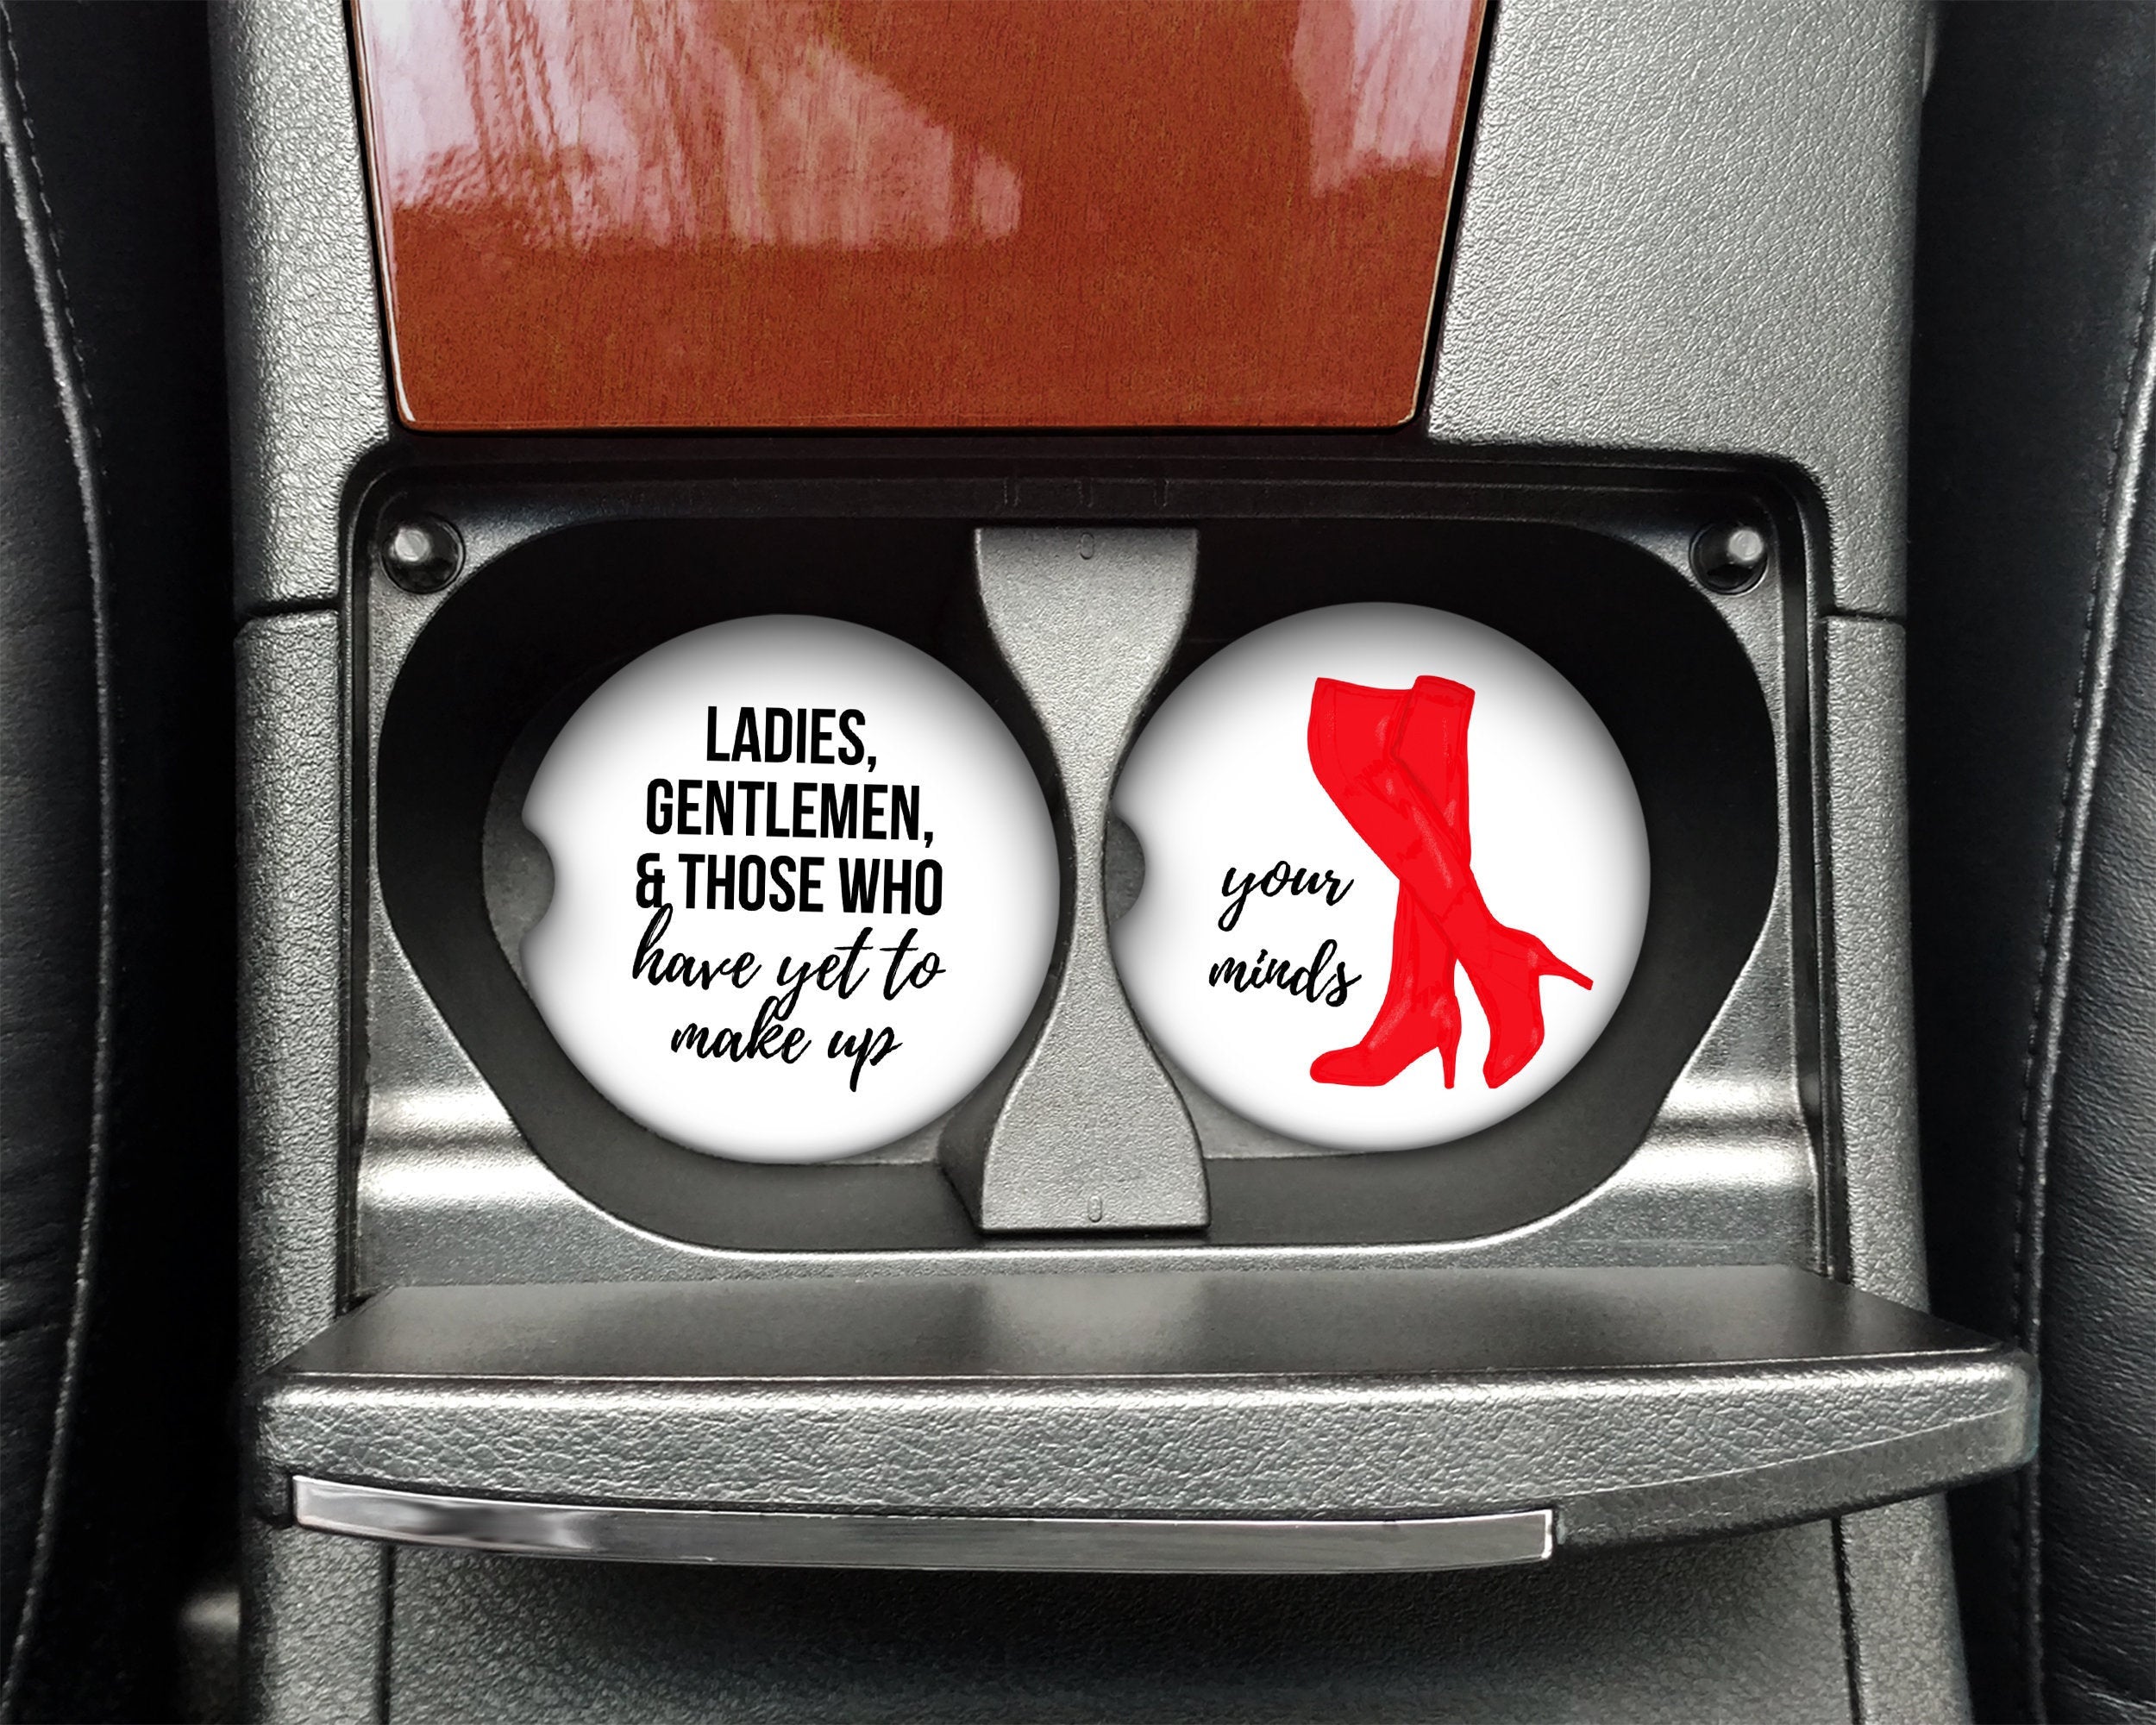 Sandstone Car Coaster Set - Kinky Boots Inspired Broadway Musical Theater Gift